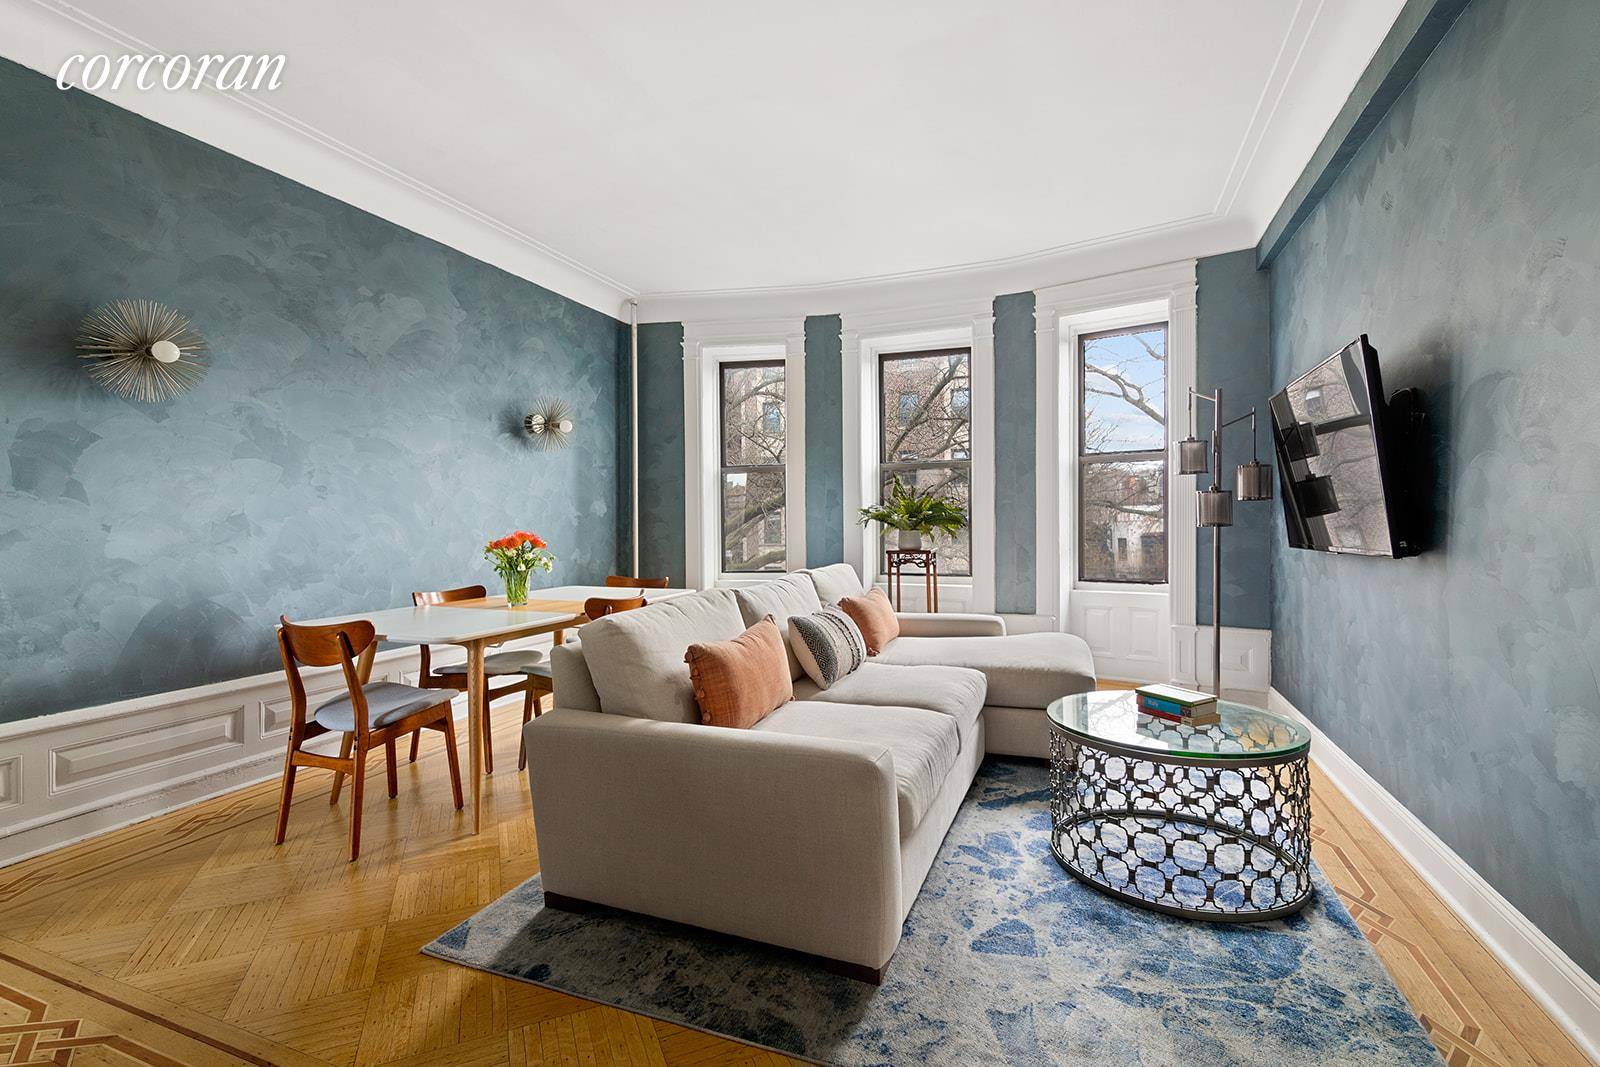 Elegant and charming, this rare two bedroom pre war CONDO is superbly located just one block from Prospect Park in the center of Park Slope.